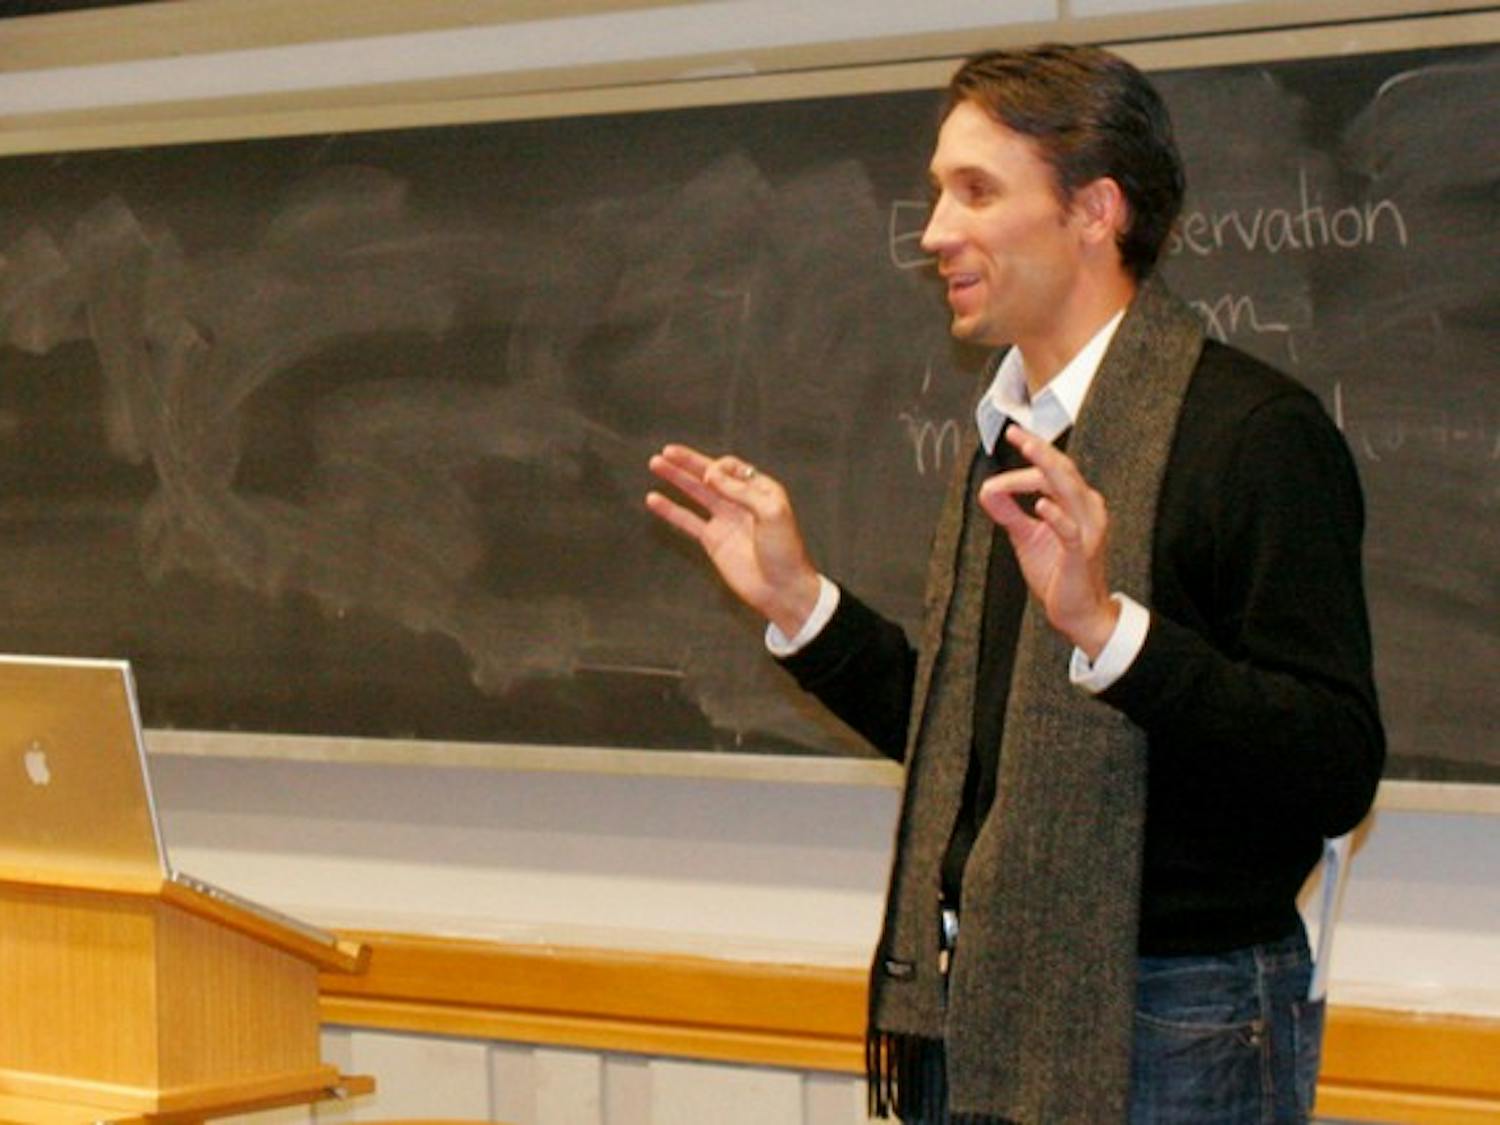 Tadd Kruse, an assistant dean at the American University of Kuwait, speaks at a Student Assembly meeting.